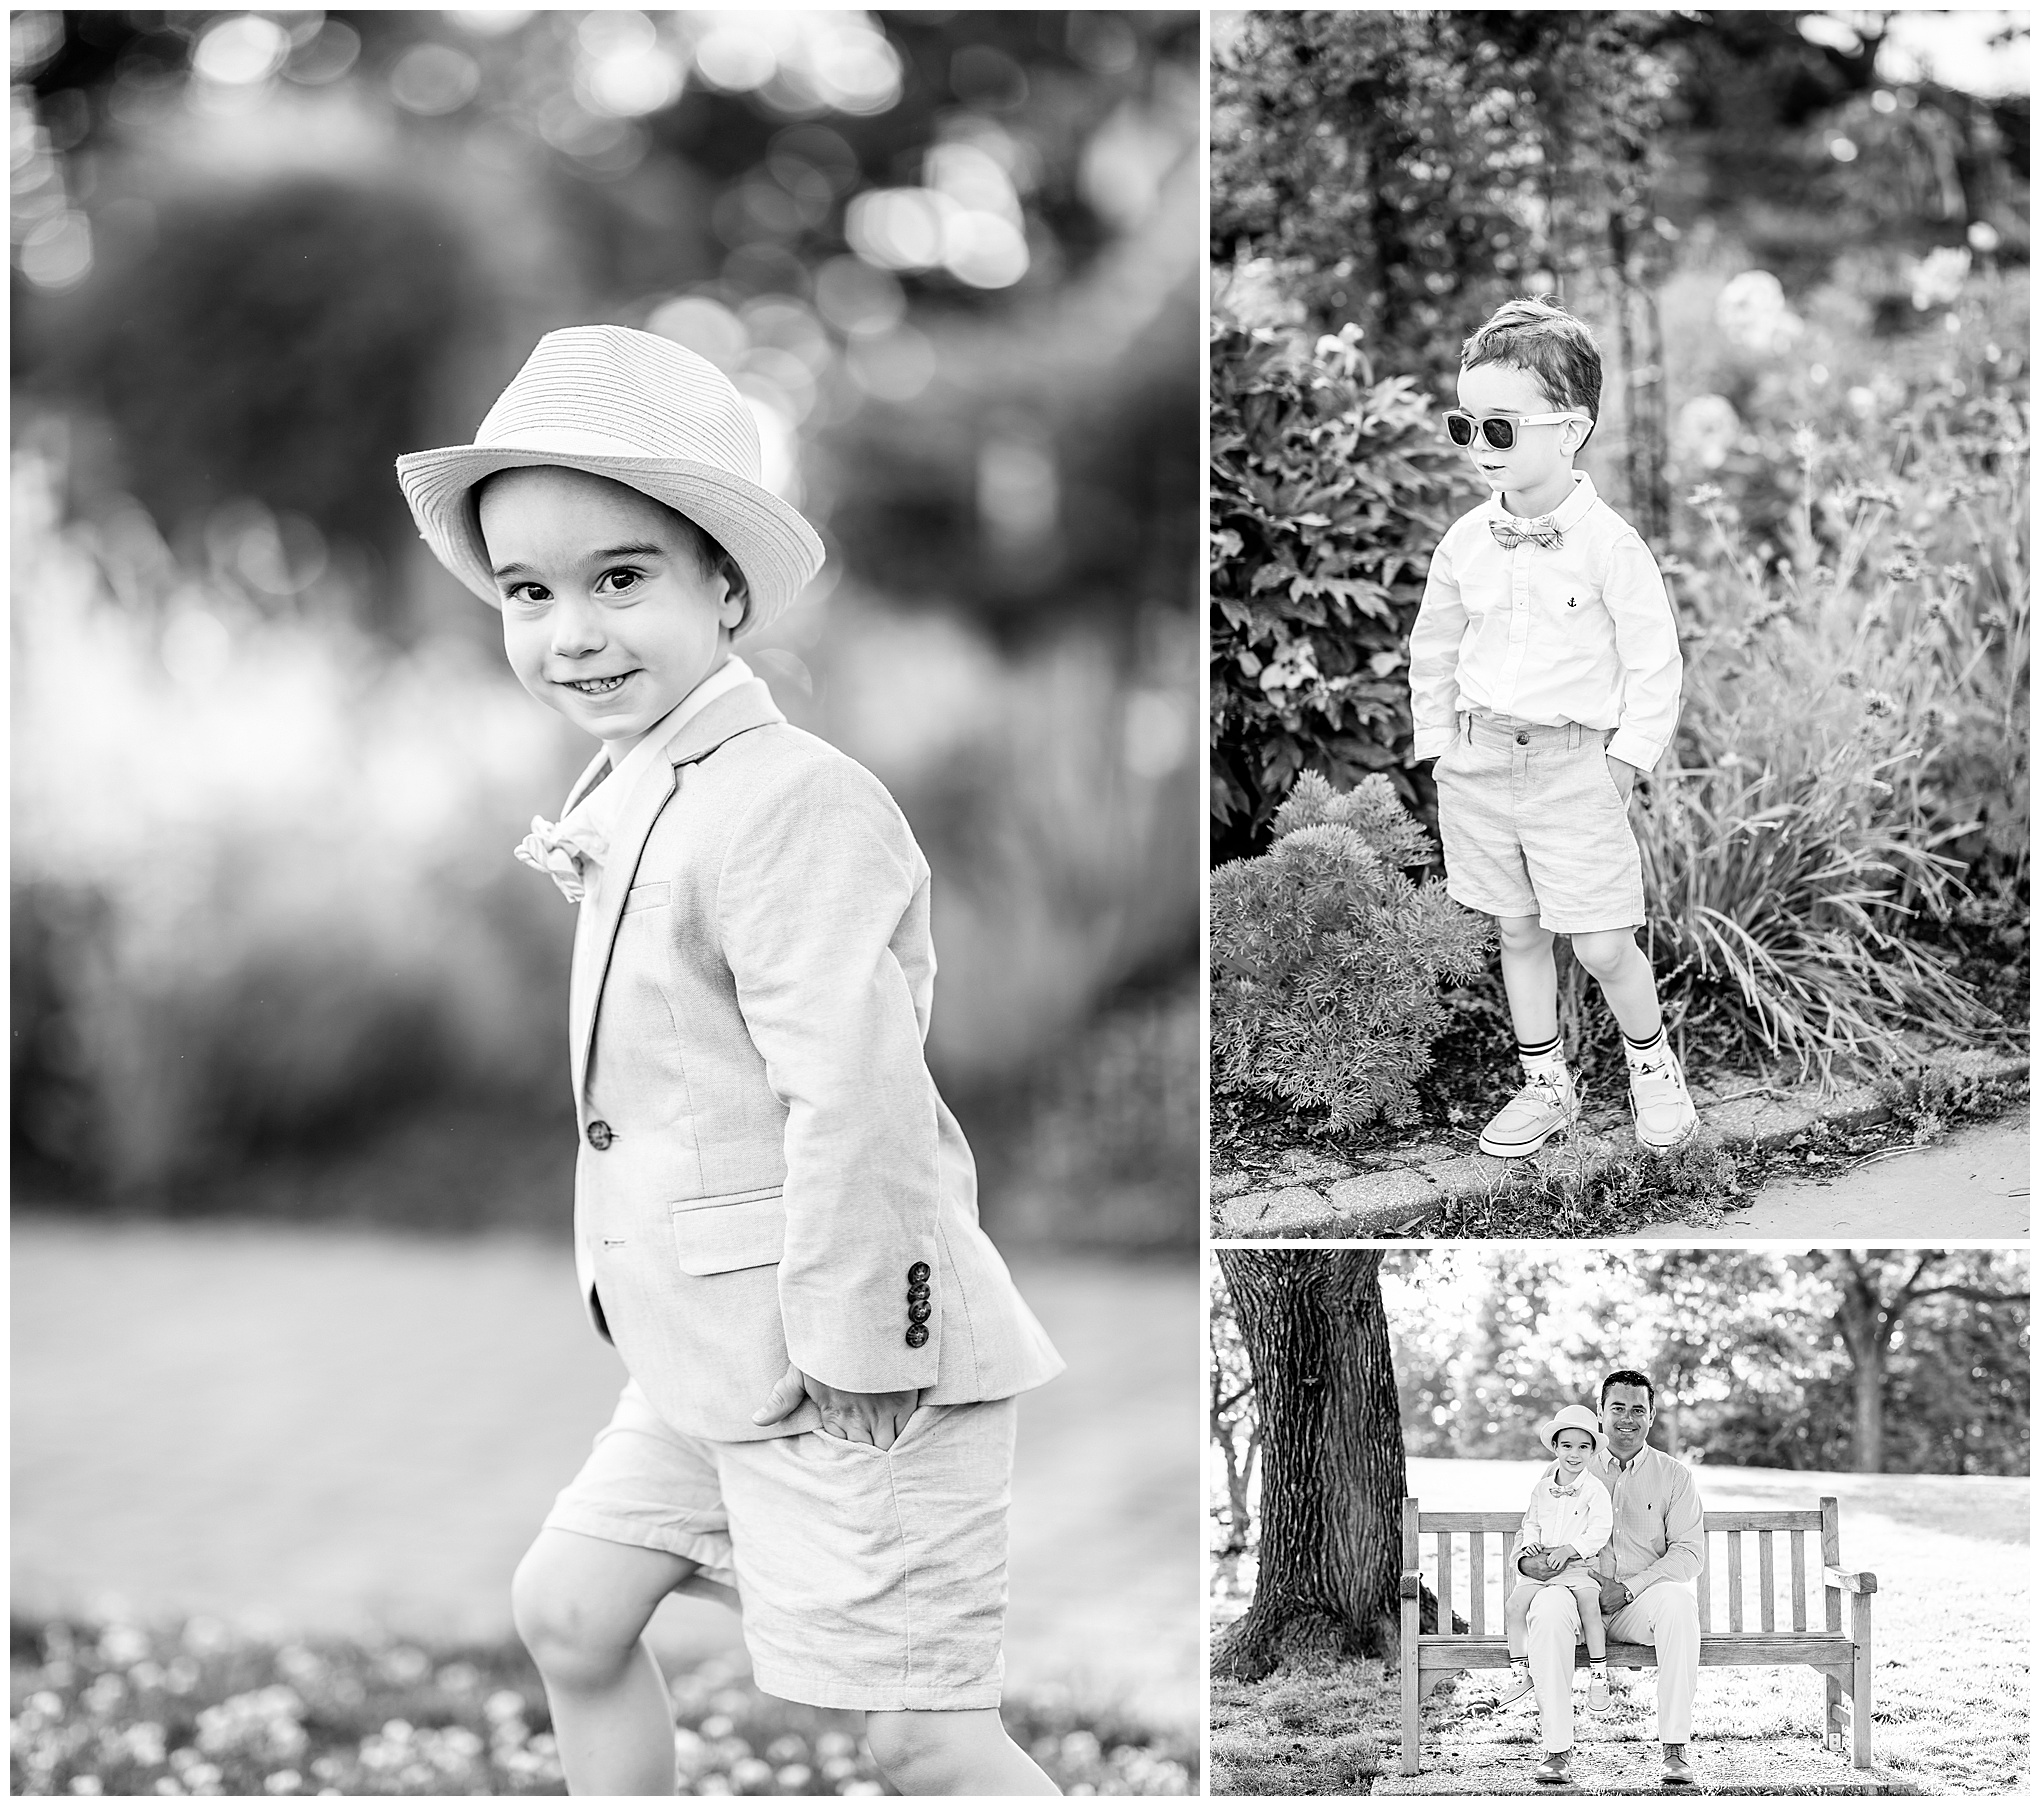 Green Spring Gardens Family Photos, Green Spring Gardens photos, Green Spring Gardens Alexandria, Alexandria family photos, spring family photos, Alexandria photographer, Rachel E.H. Photography, toddler in garden, toddler wearing hat and sunglasses, black and white